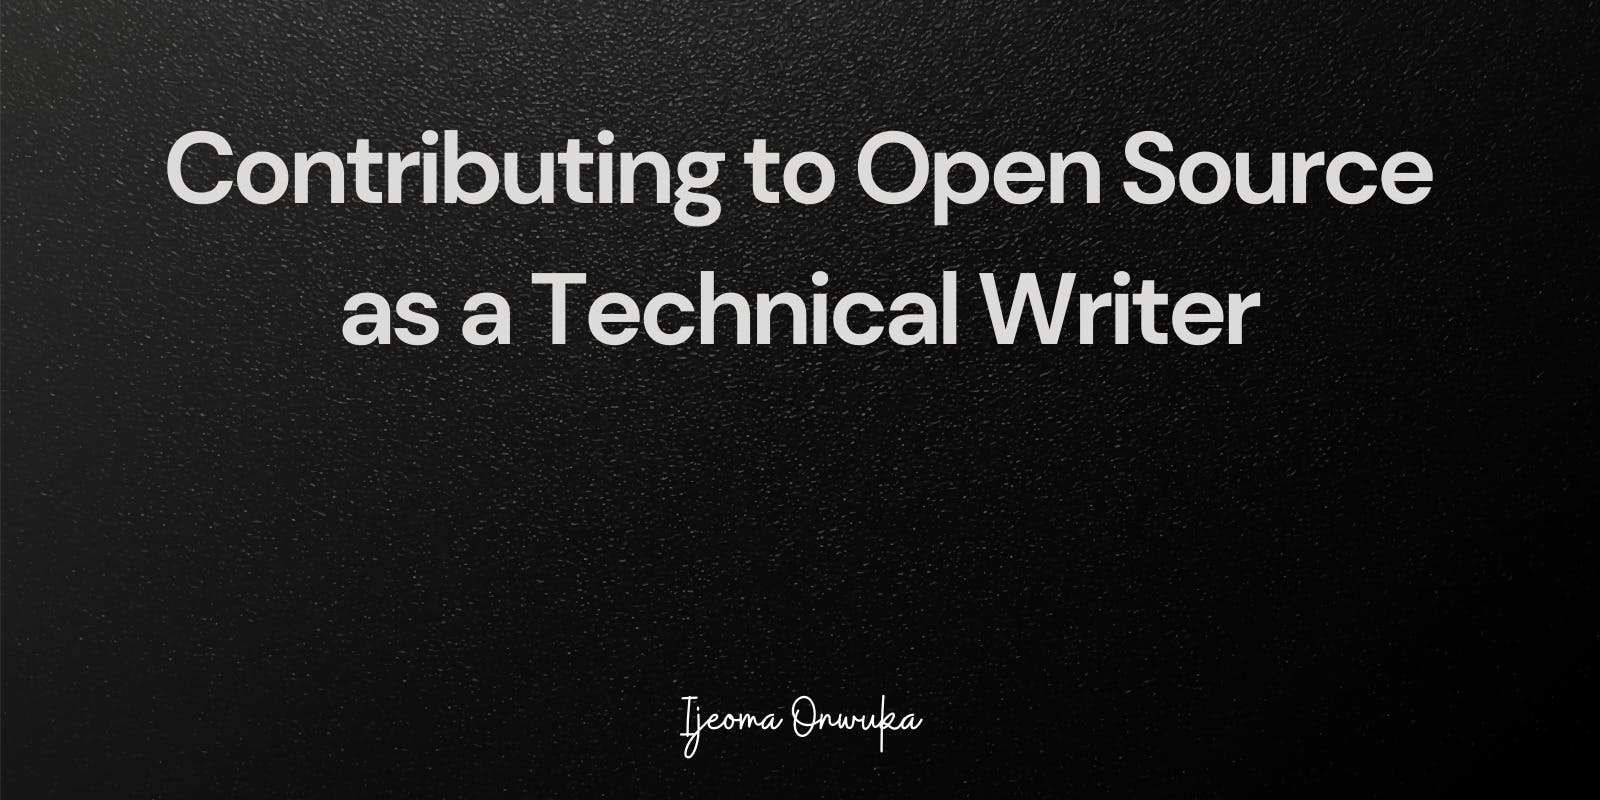 Contributing to Open Source as a Technical Writer